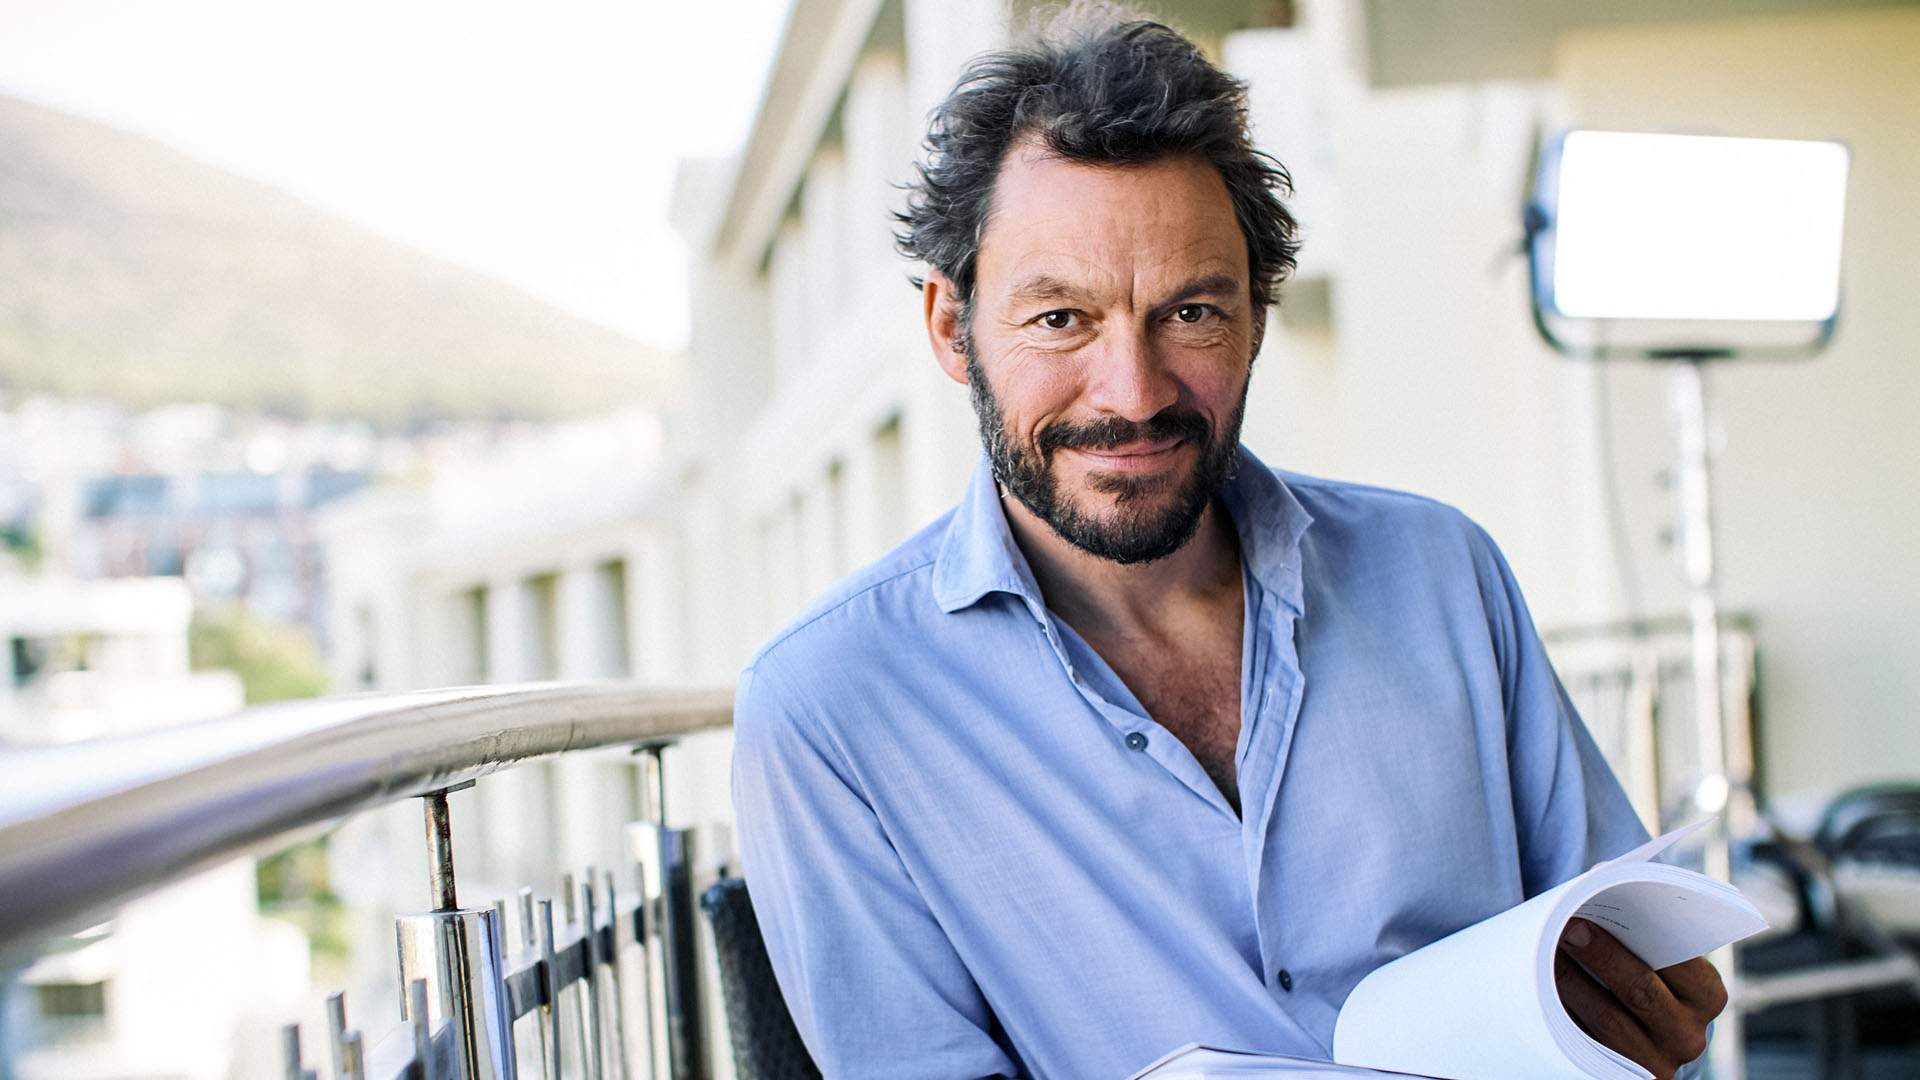 This Short Film Competition Gives Filmmakers the Chance to Work With Dominic West